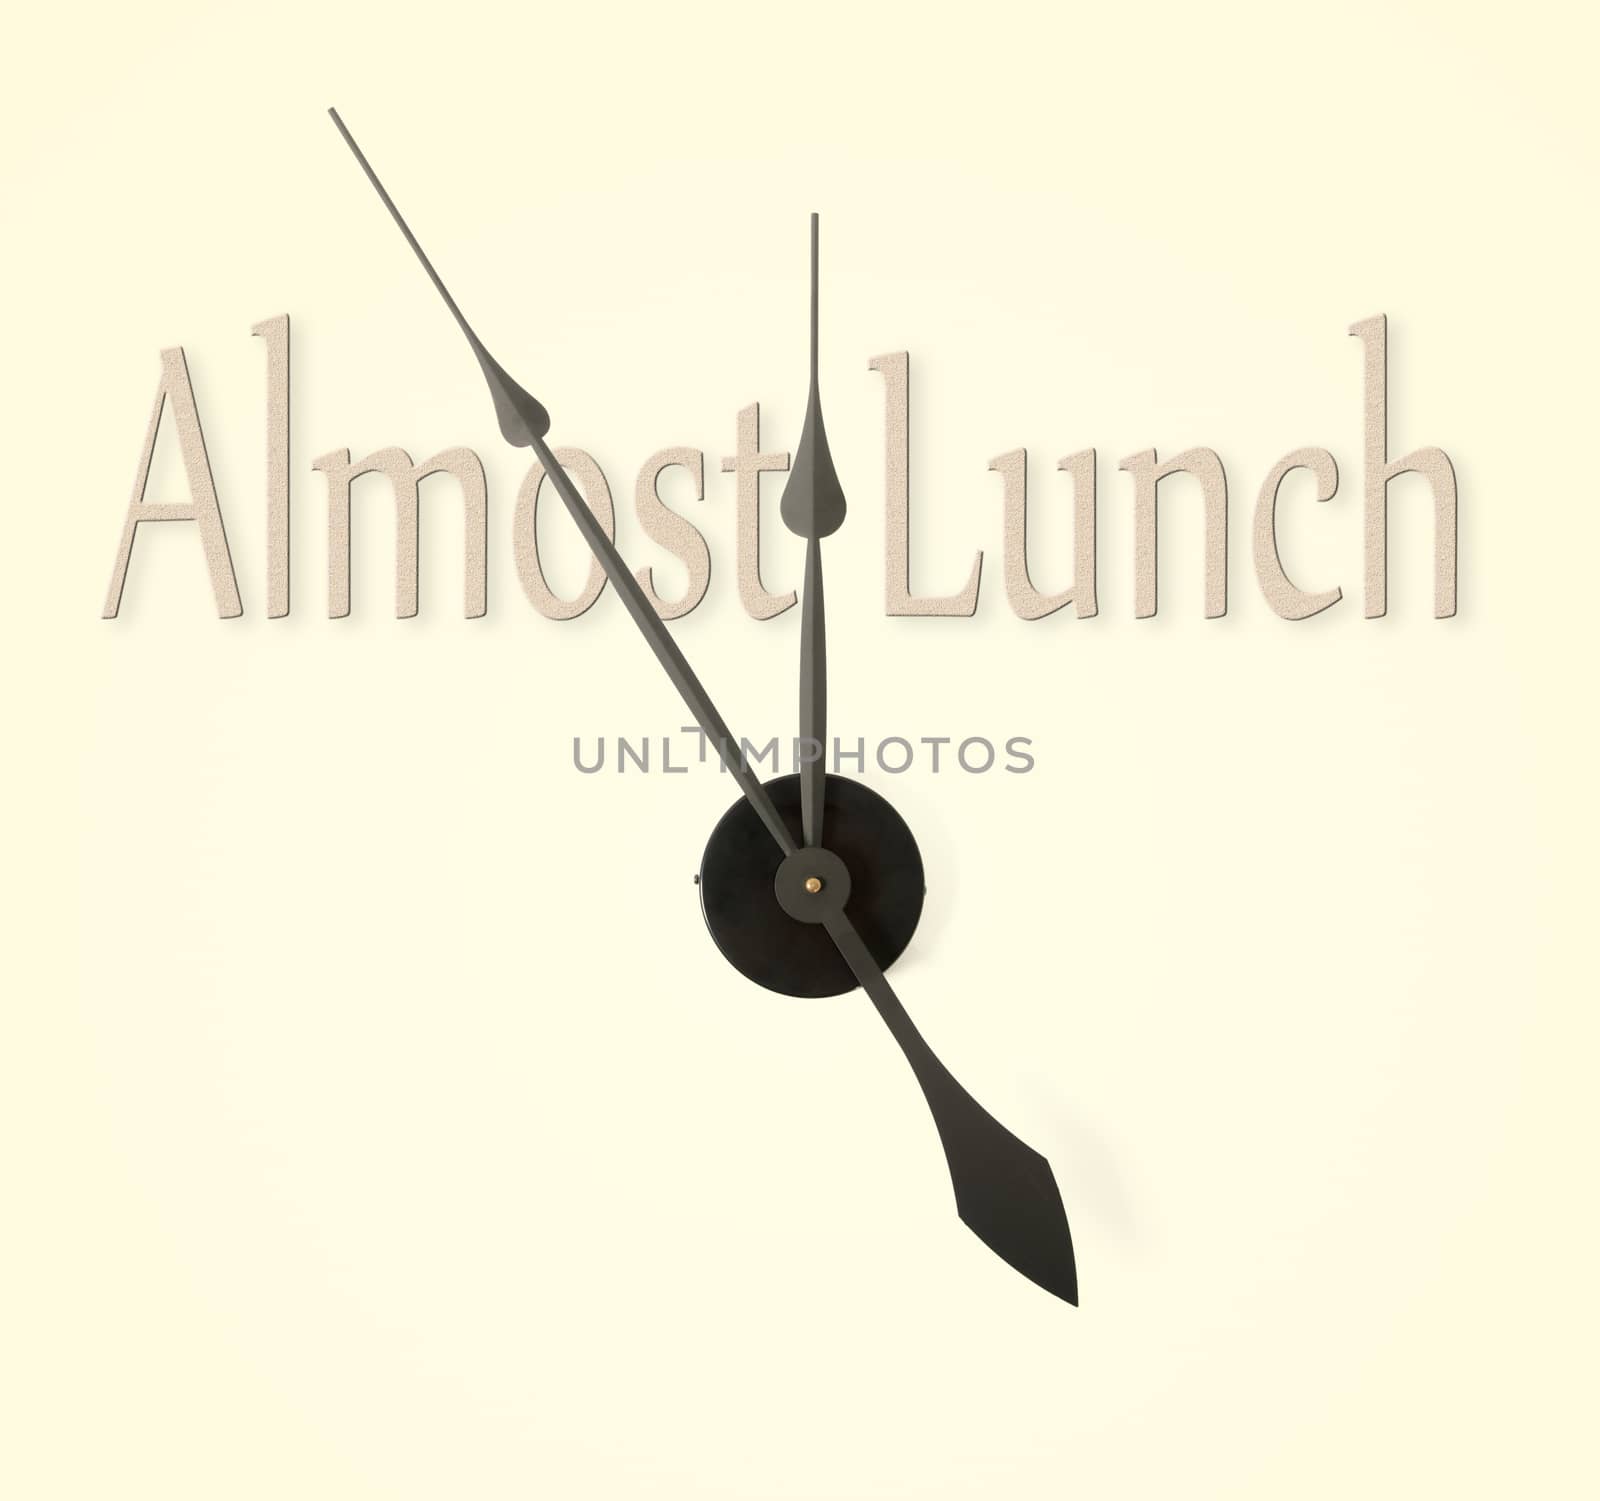 Clock hands pointing to almost lunch